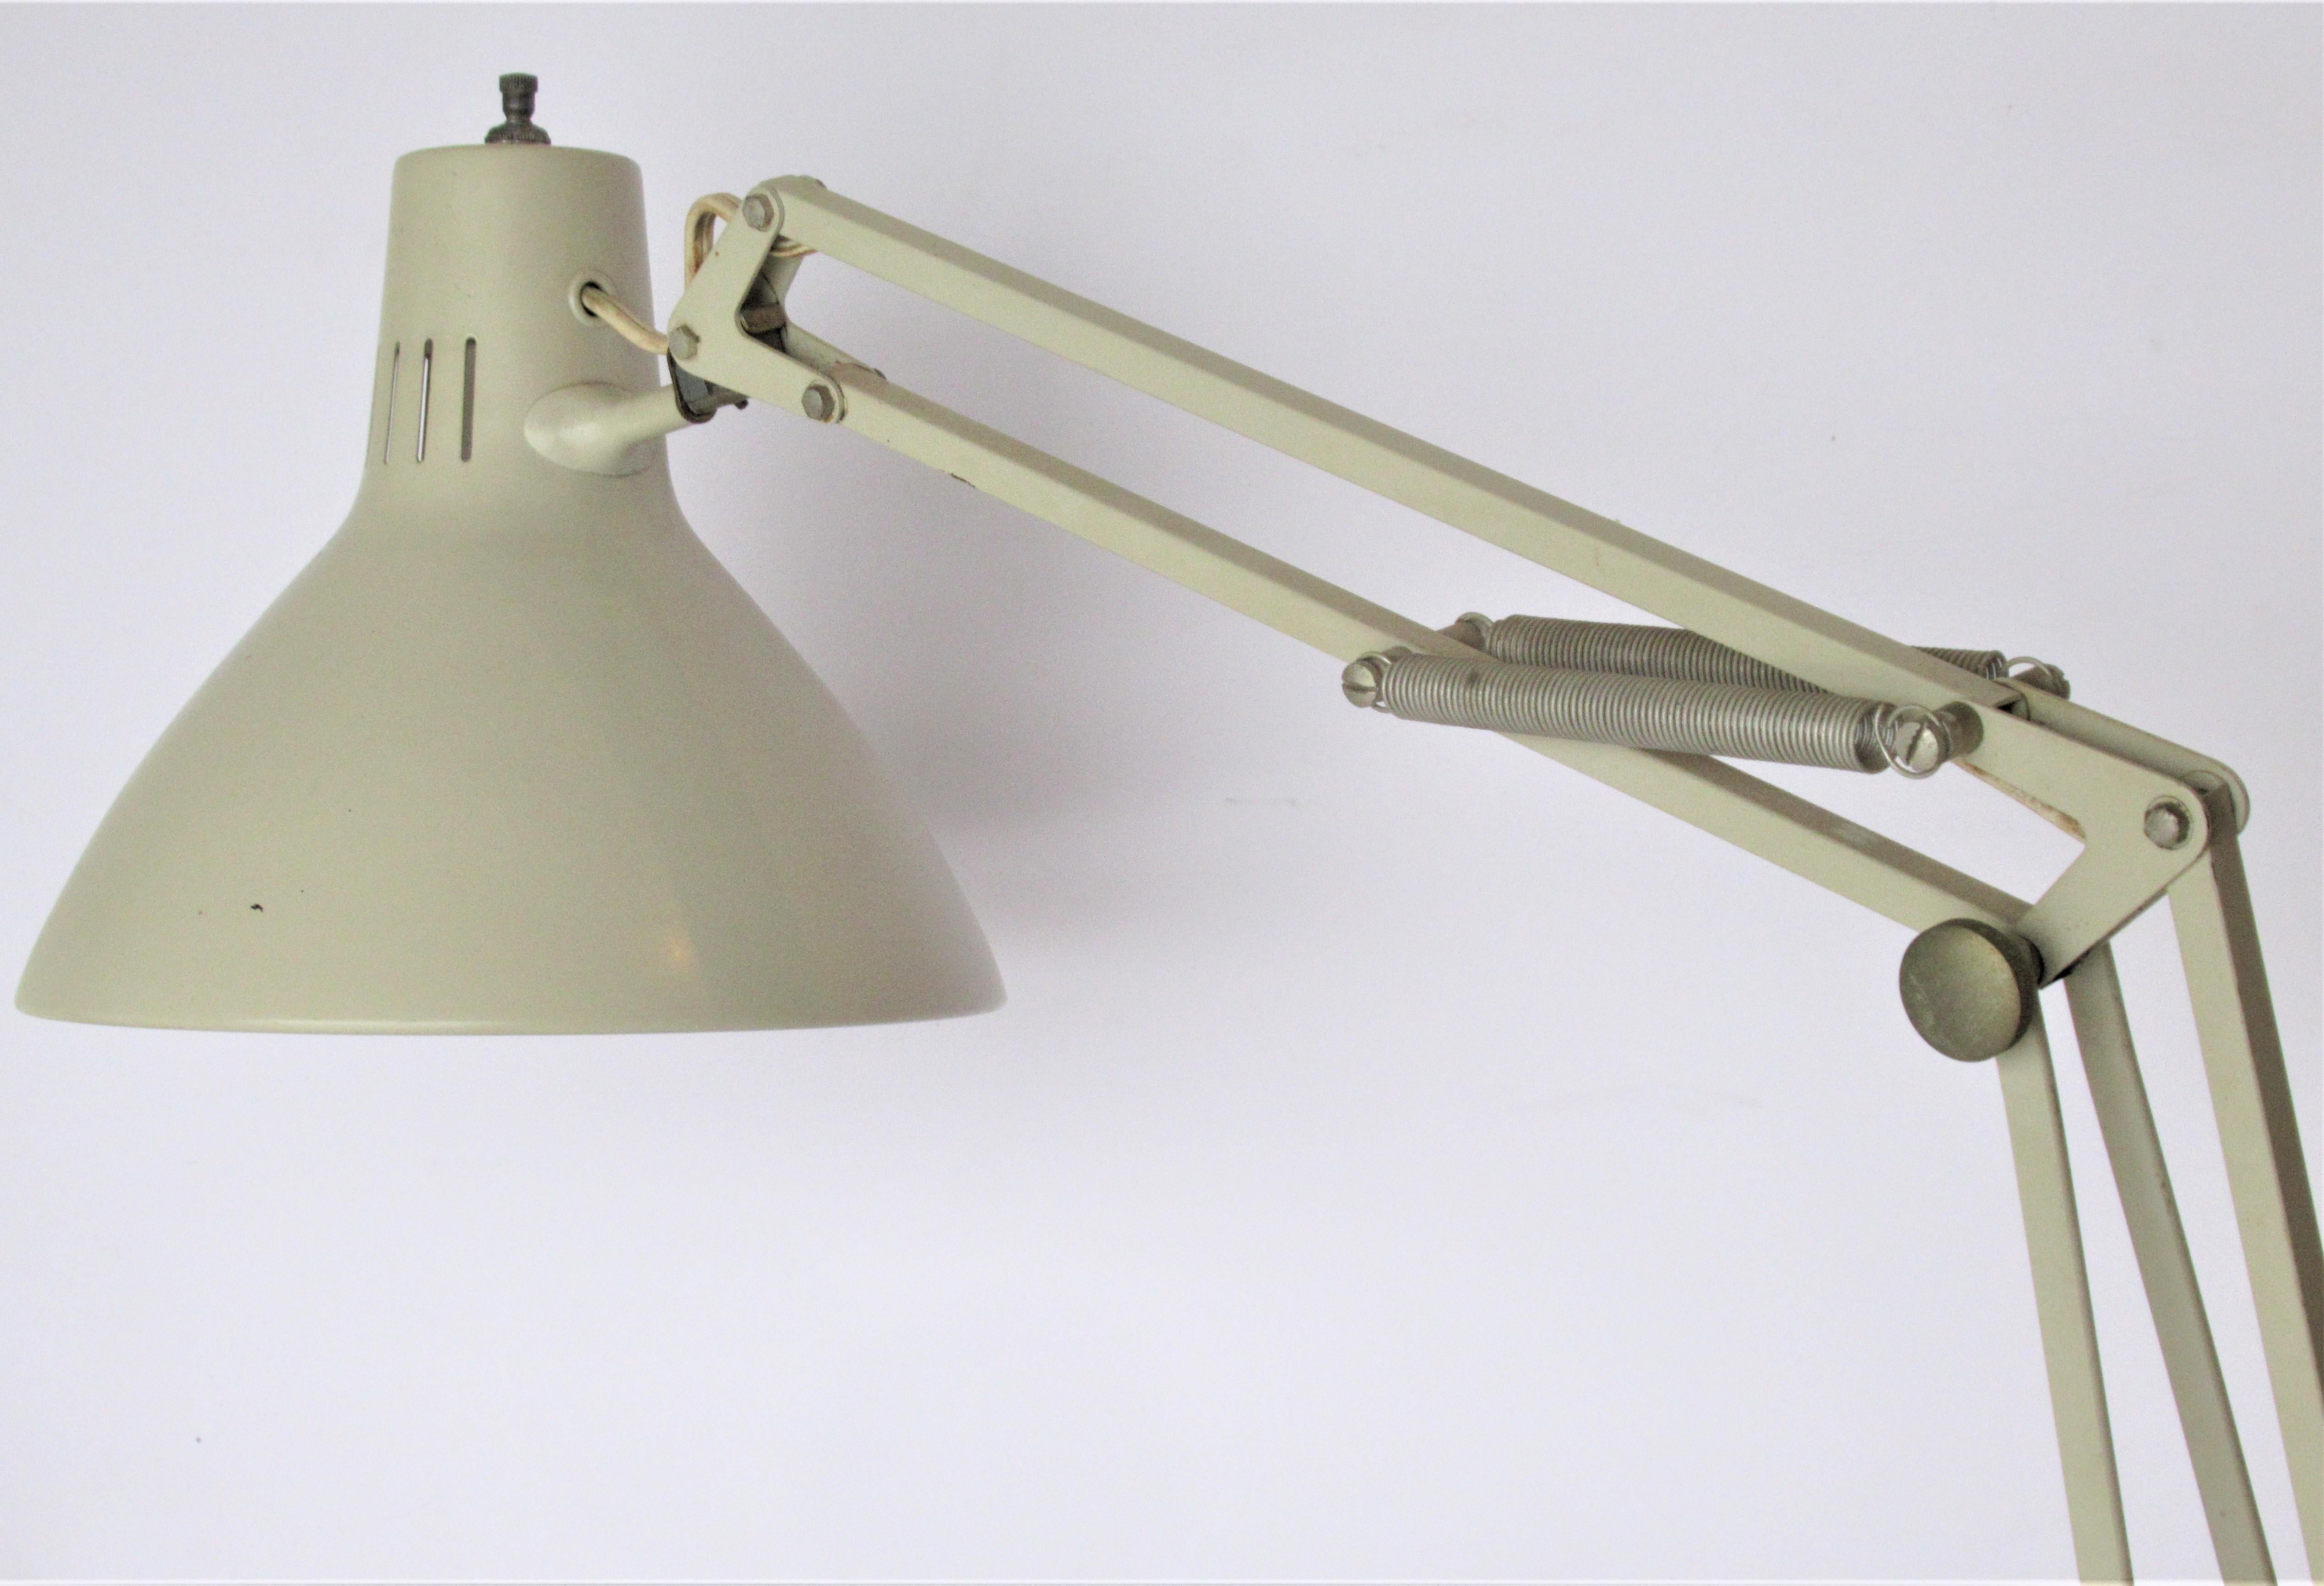 Architectural Drafting Lamp by Luxo, Norway 1